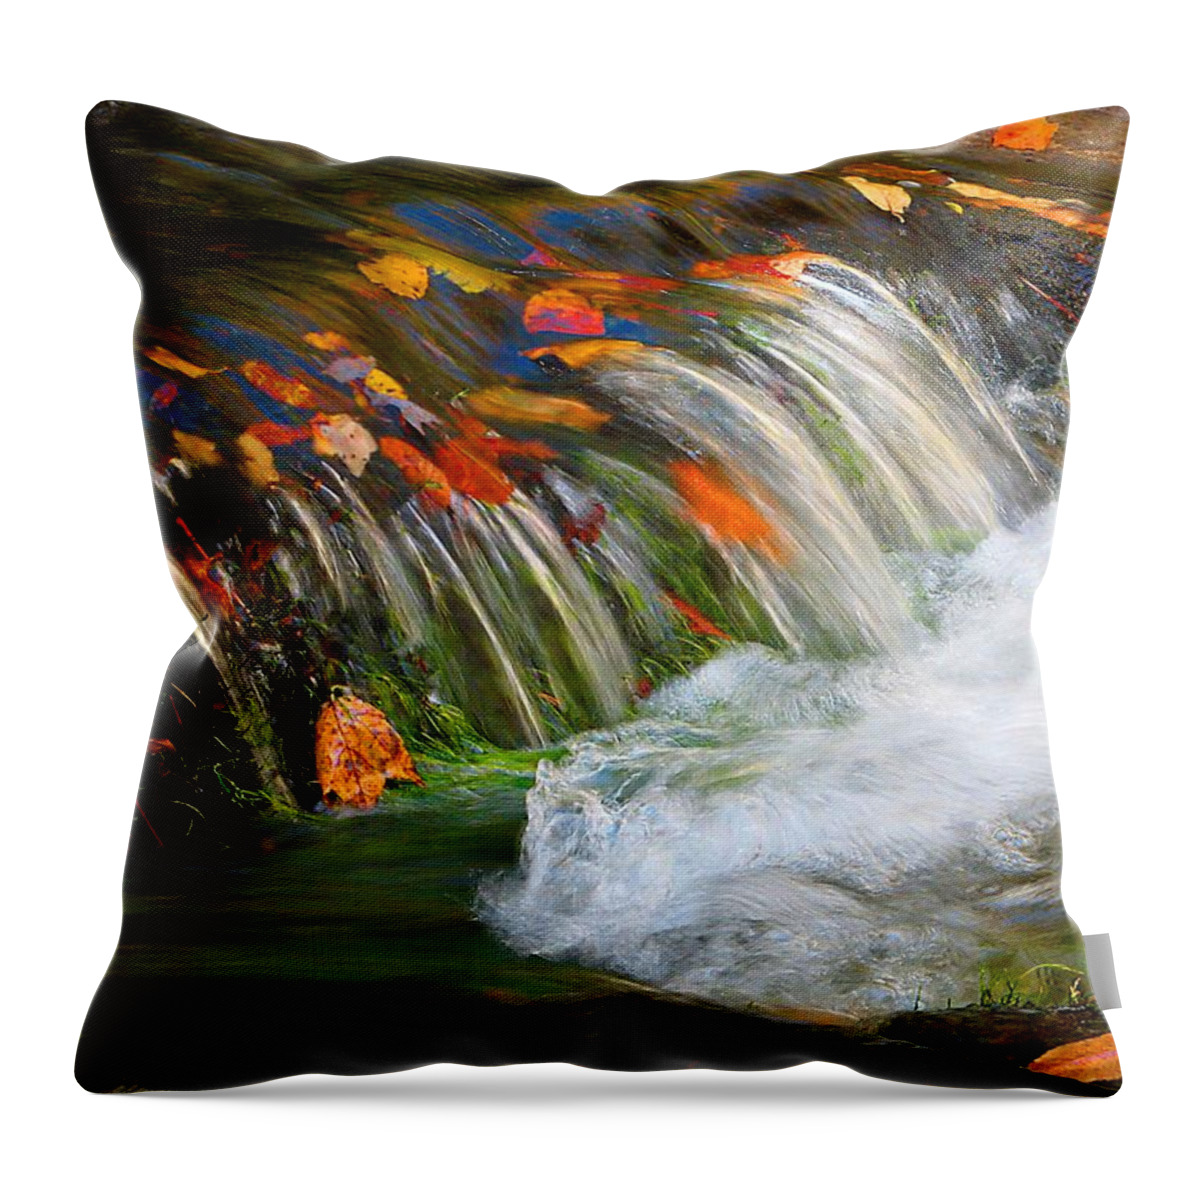 Fall Stream Throw Pillow featuring the photograph The Stream by Michael Eingle